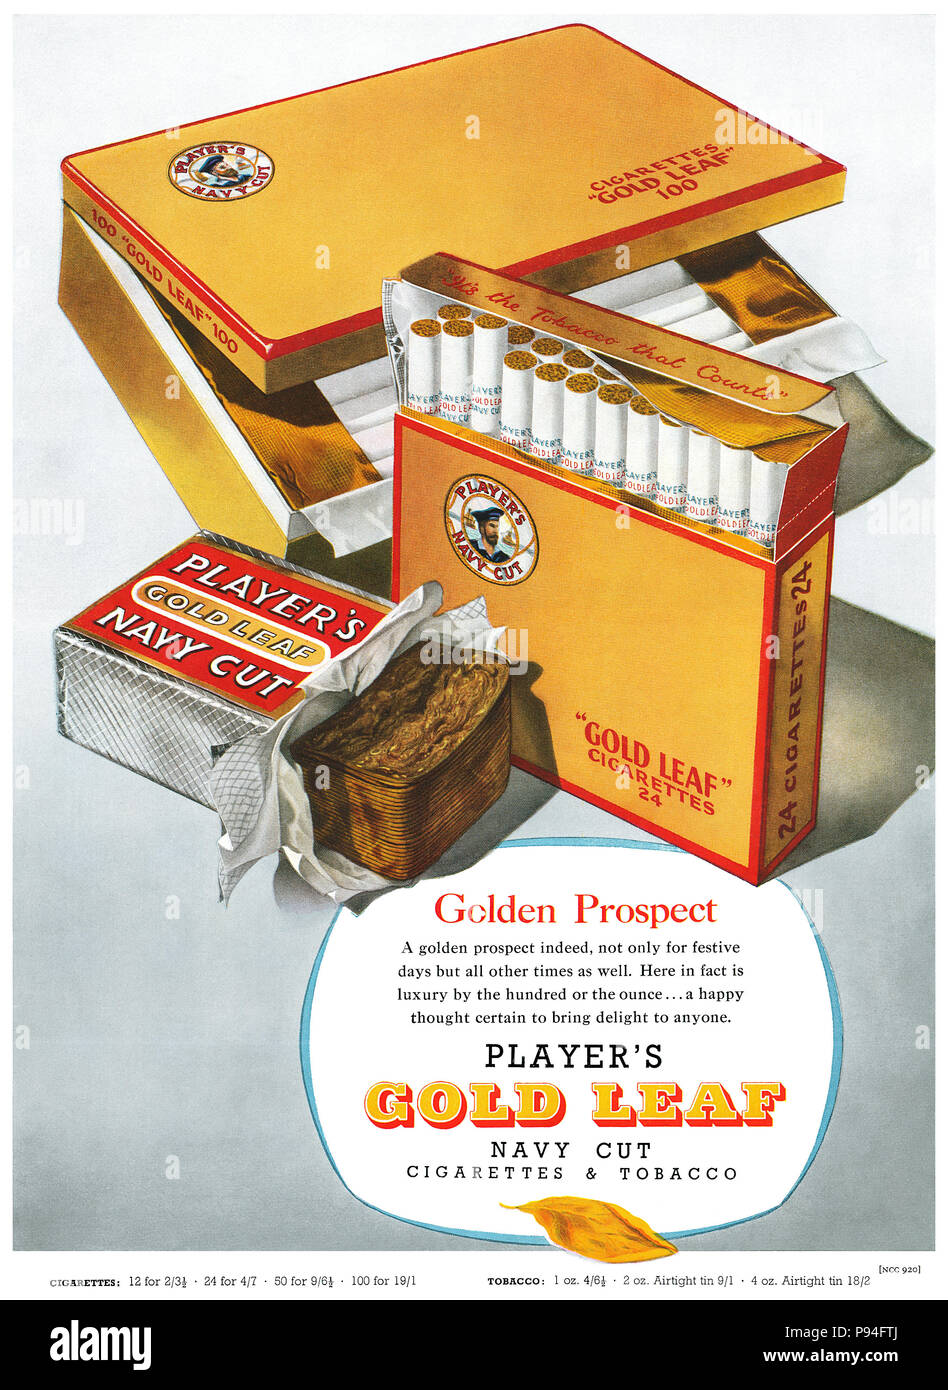 1955 British advertisement for Player's Gold Leaf Navy Cut cigarettes and tobacco. Stock Photo